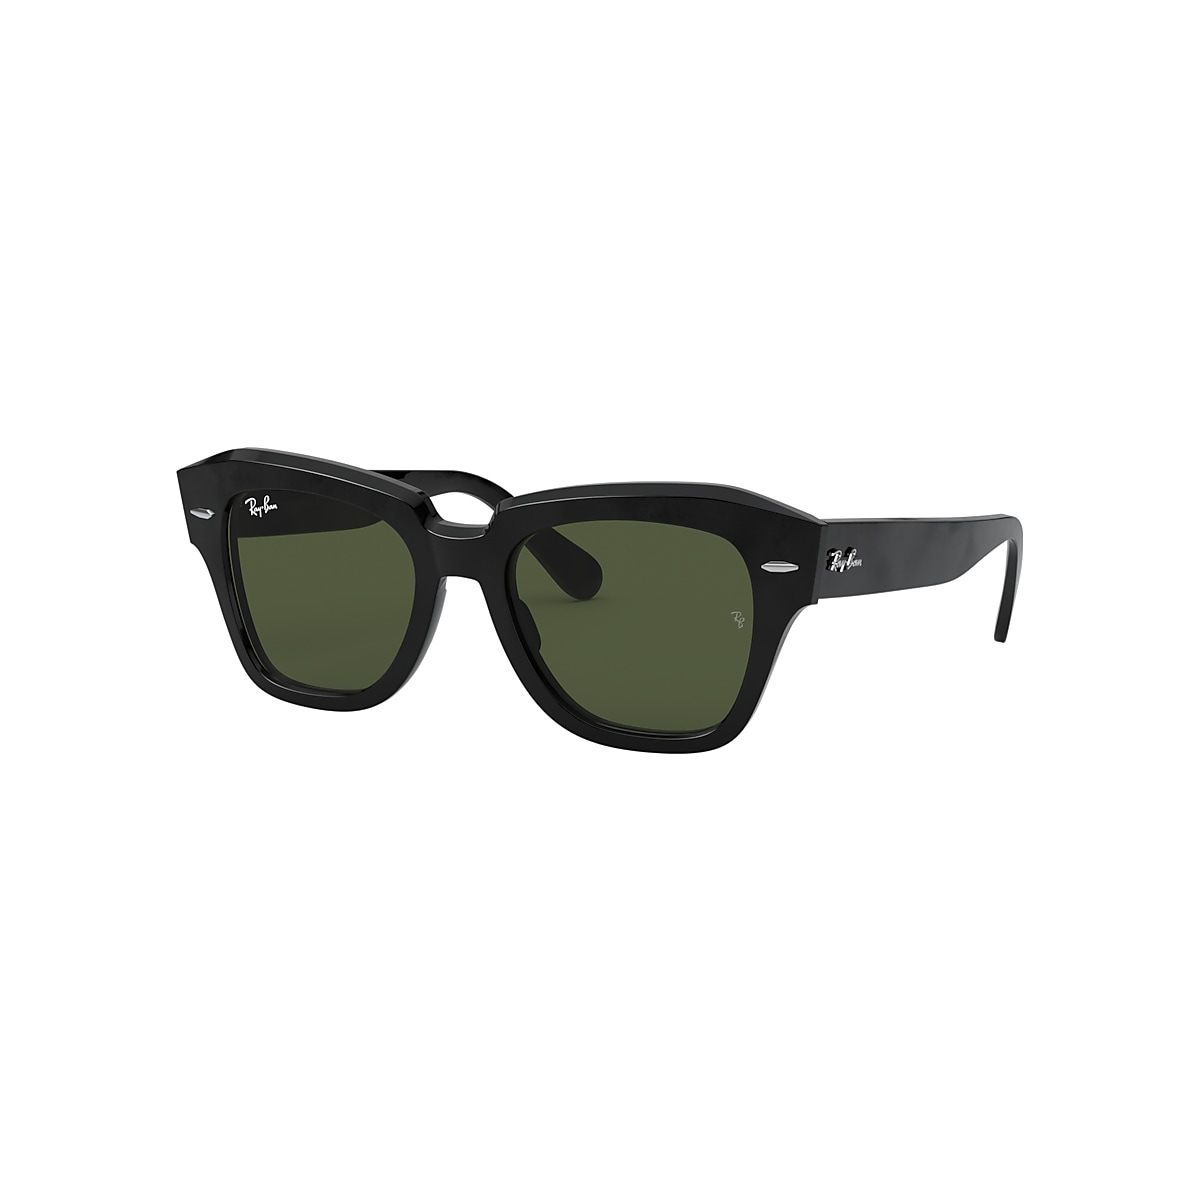 State Street Sunglasses in Black and |